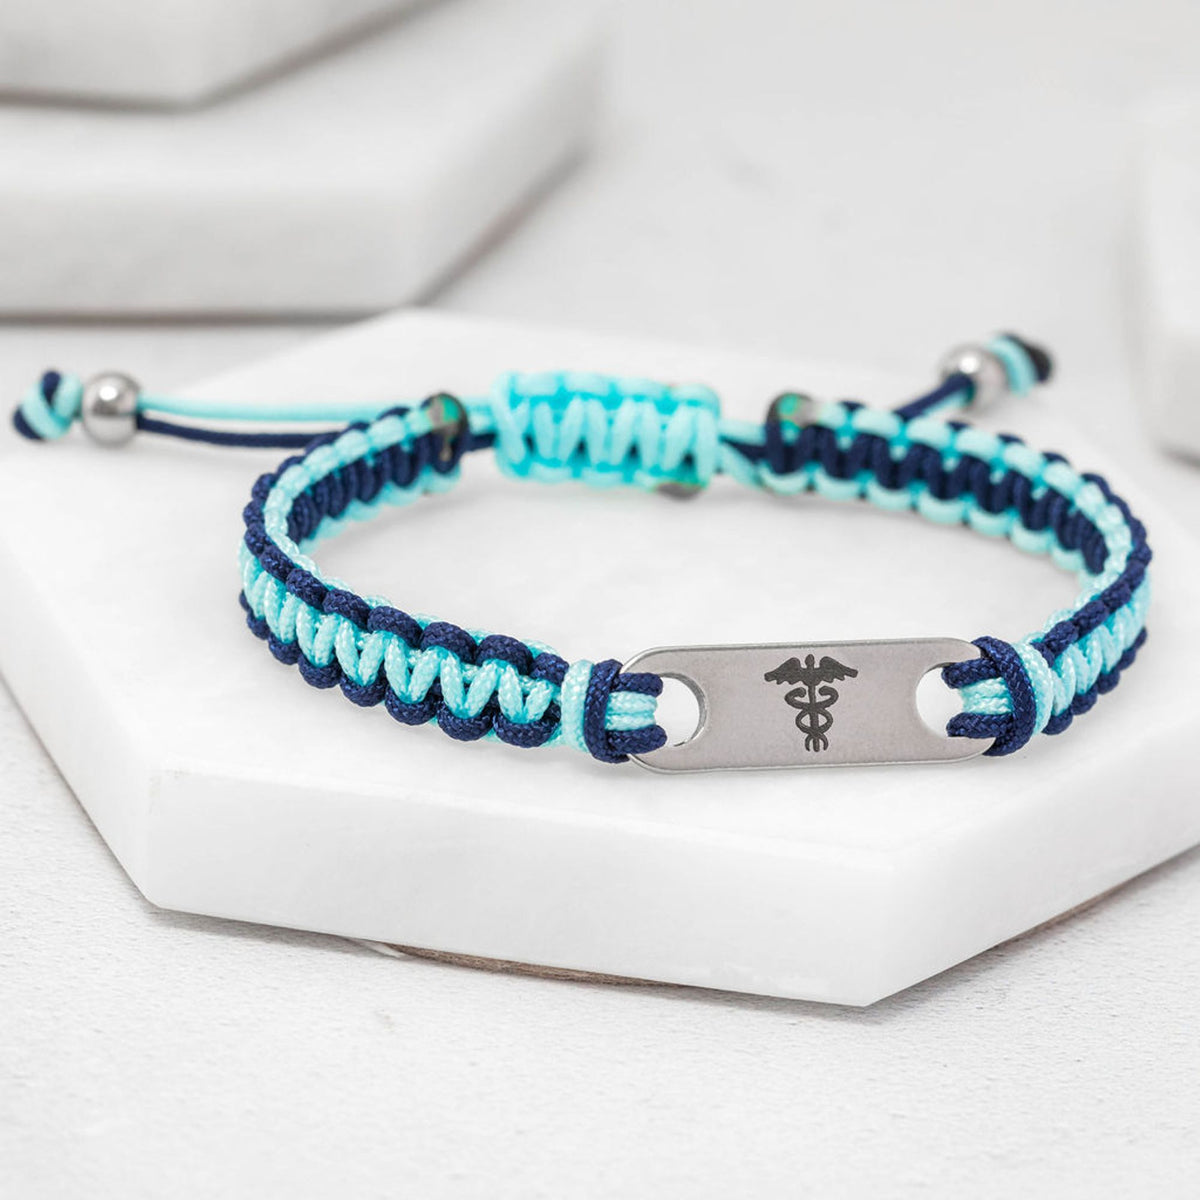 Pretty Medical ID Bracelets for Women to Glam it Up! - StickyJ Medical ID